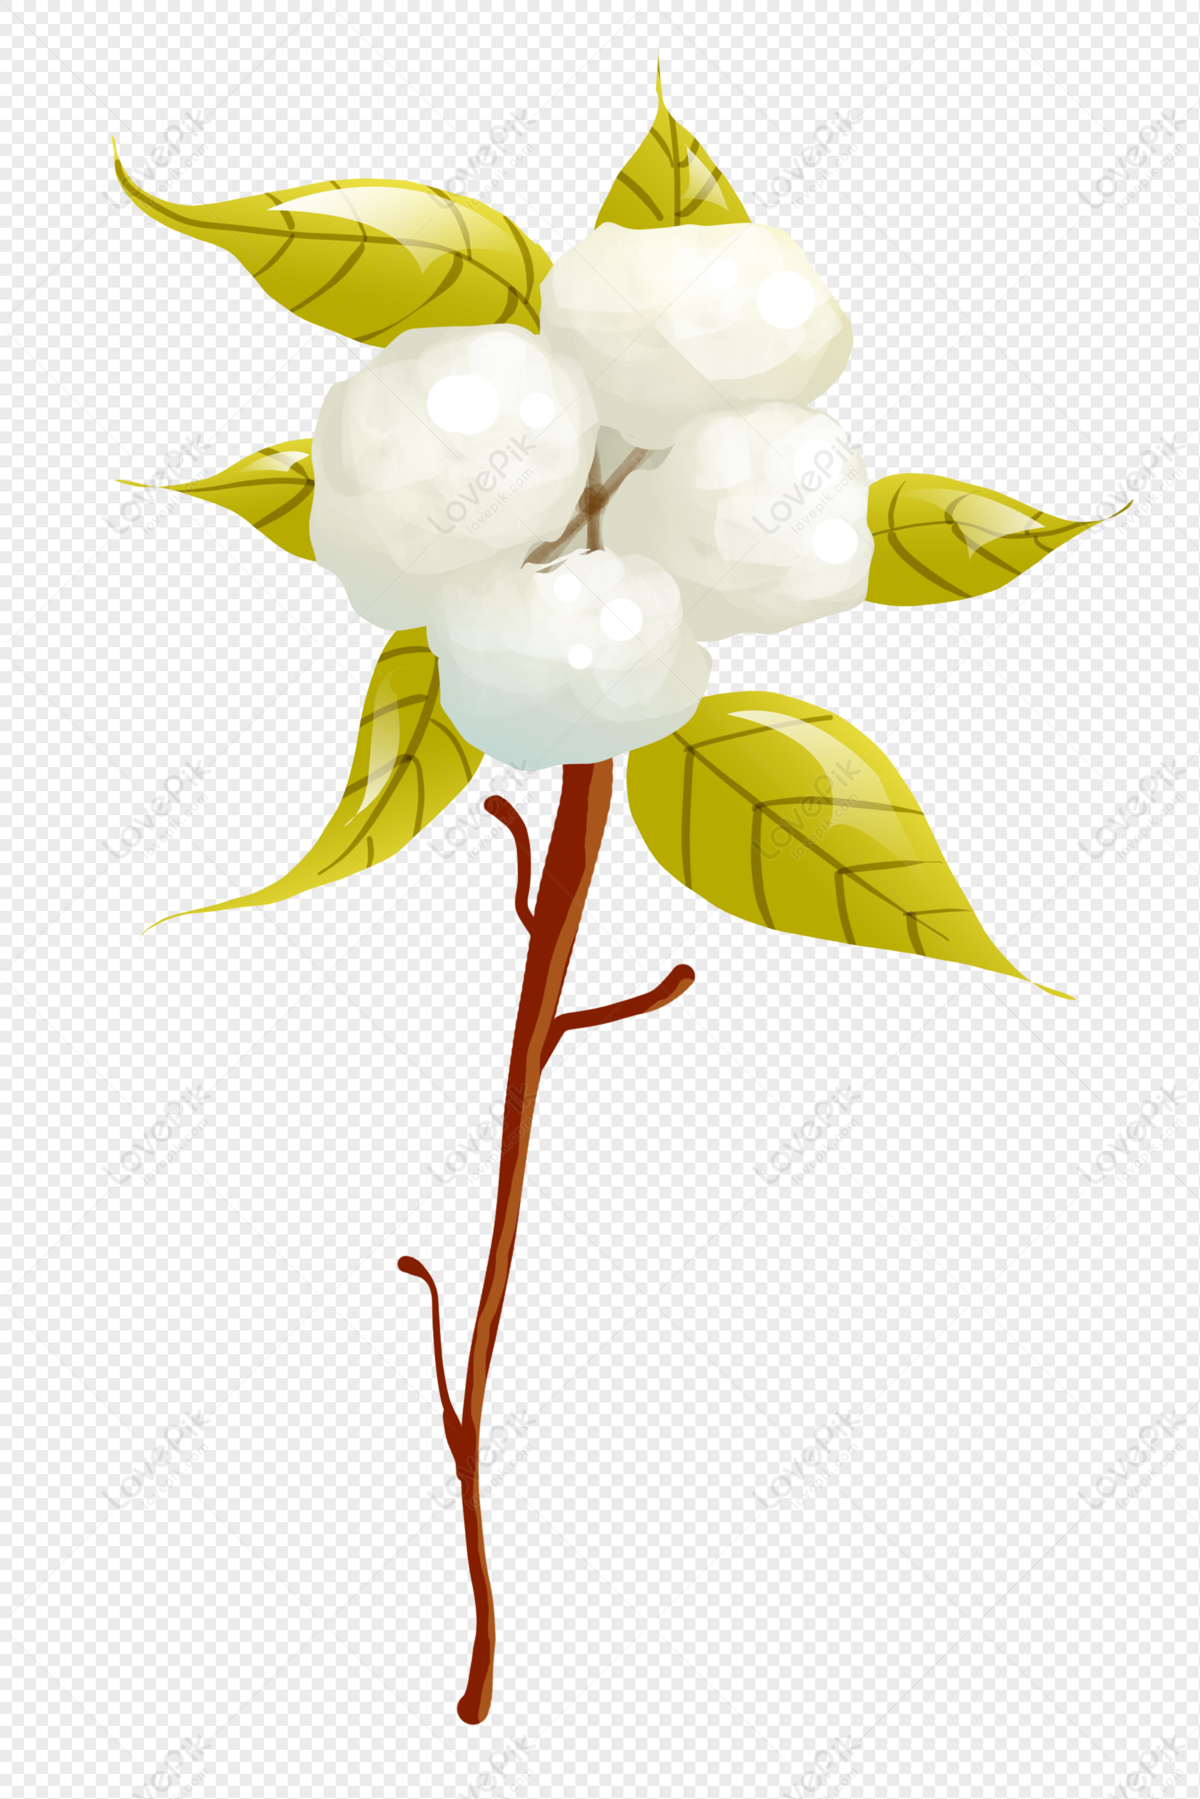 Cotton PNG Transparent Image And Clipart Image For Free Download ...